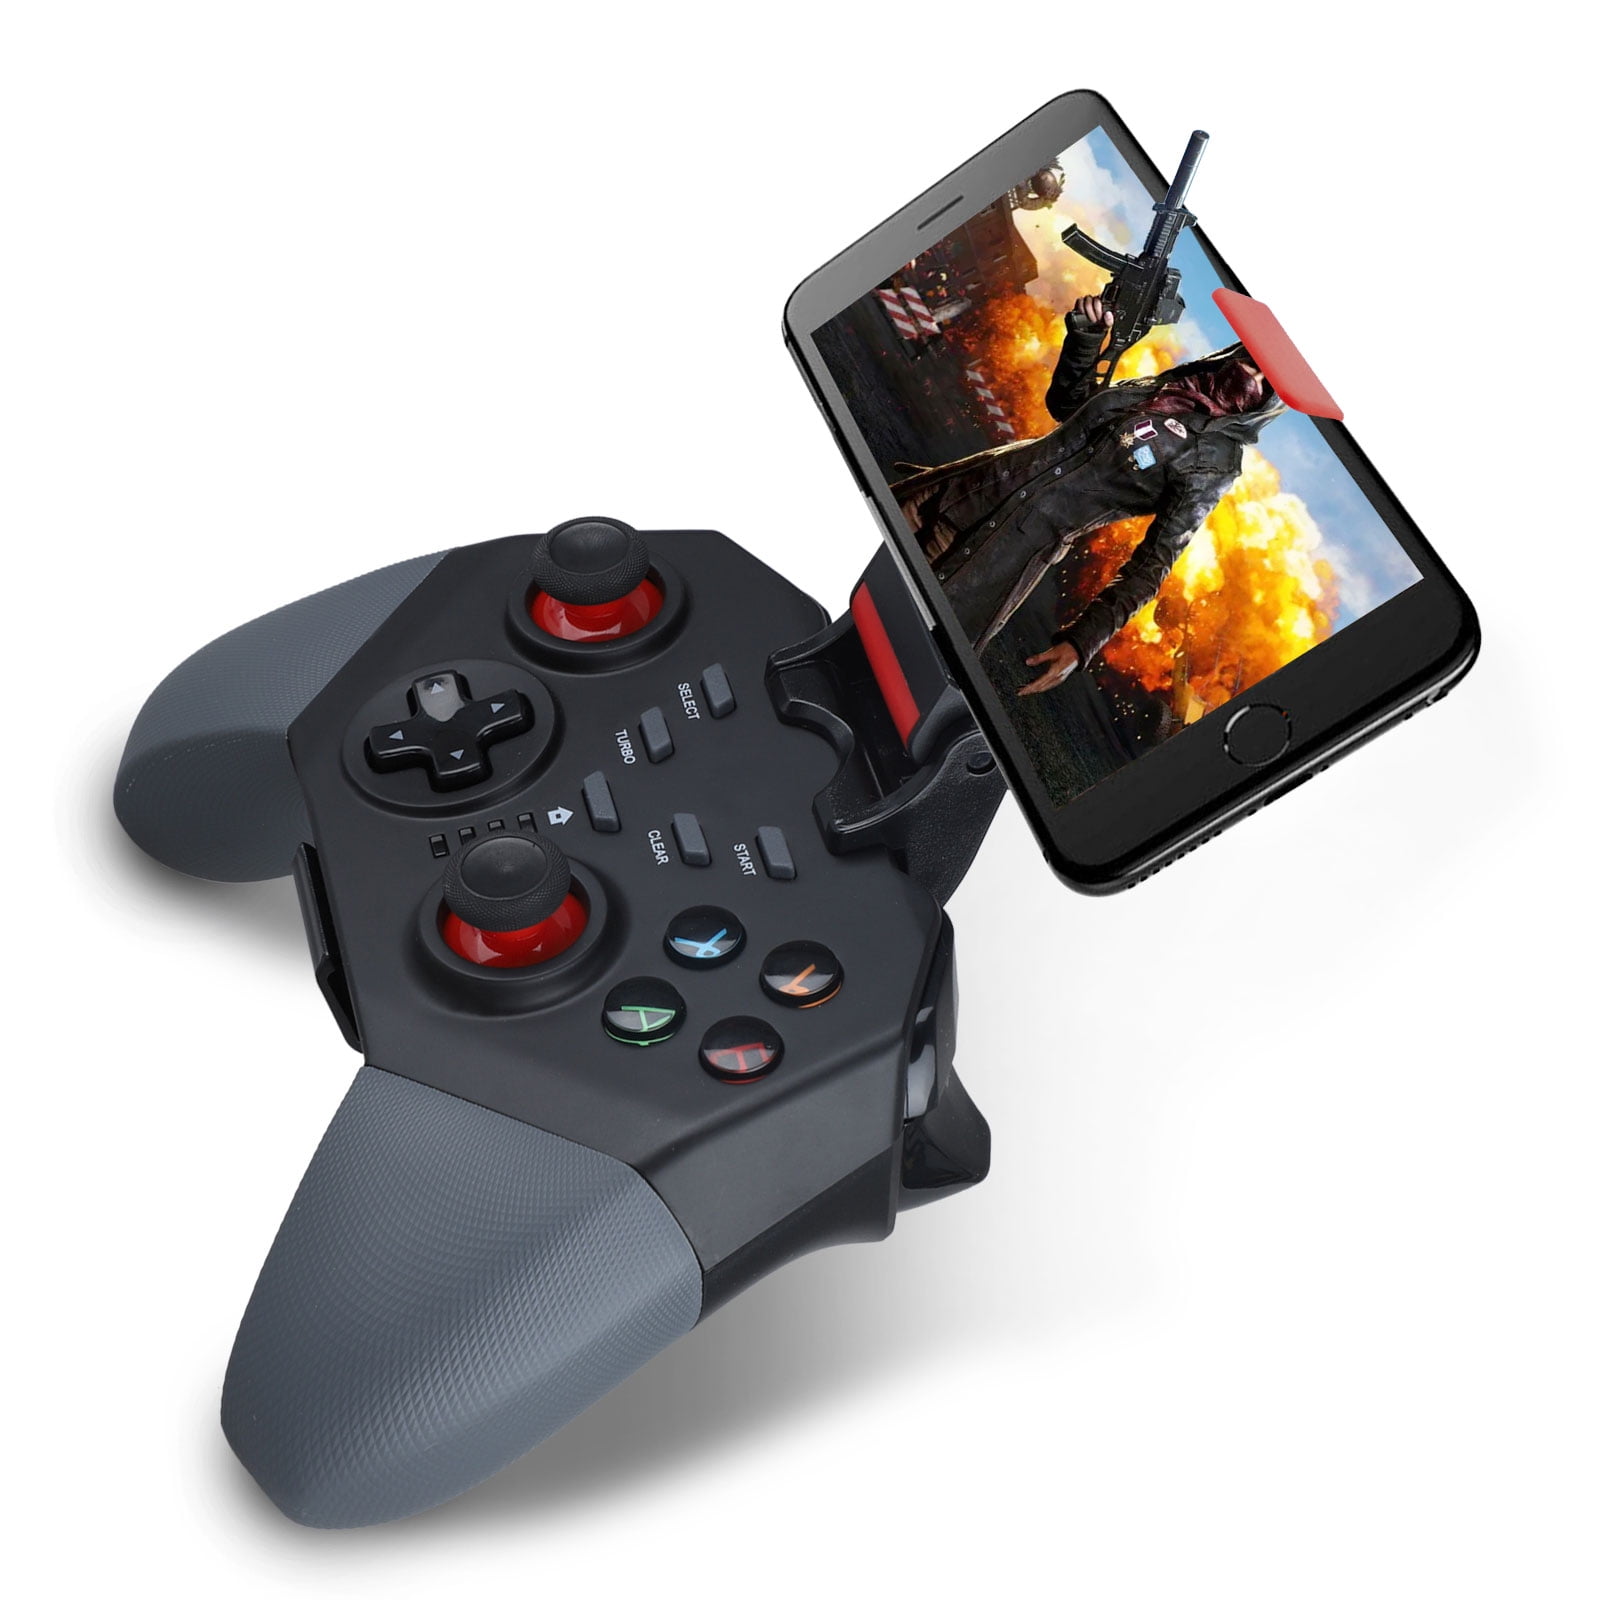 Mobile Game Controller Tsv Gaming Controller Gamepad Compatible With Android Windows Pc Ergonomic Wireless Controller Joystick With Phone Bracket Stand Fits 3 5 6 Phone Built In 380mah Battery Walmart Com Walmart Com - roblox windows 10 gamepad